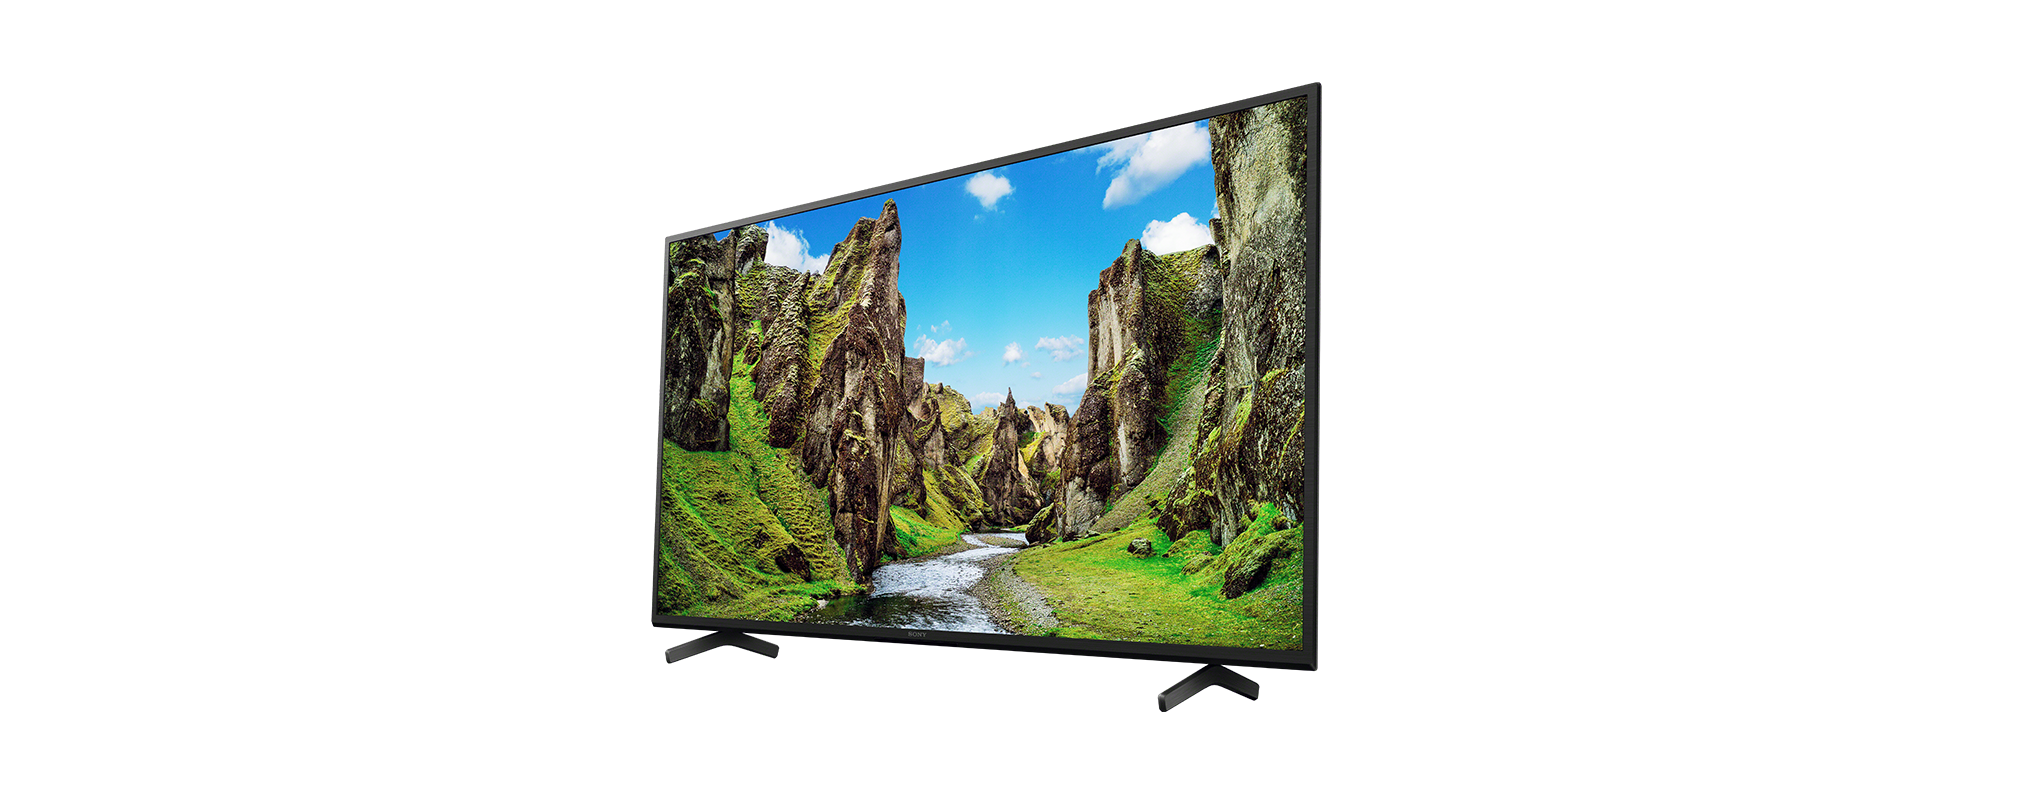 43X75 | 4K Ultra HD | HDR | Smart TV (Android TV)_2